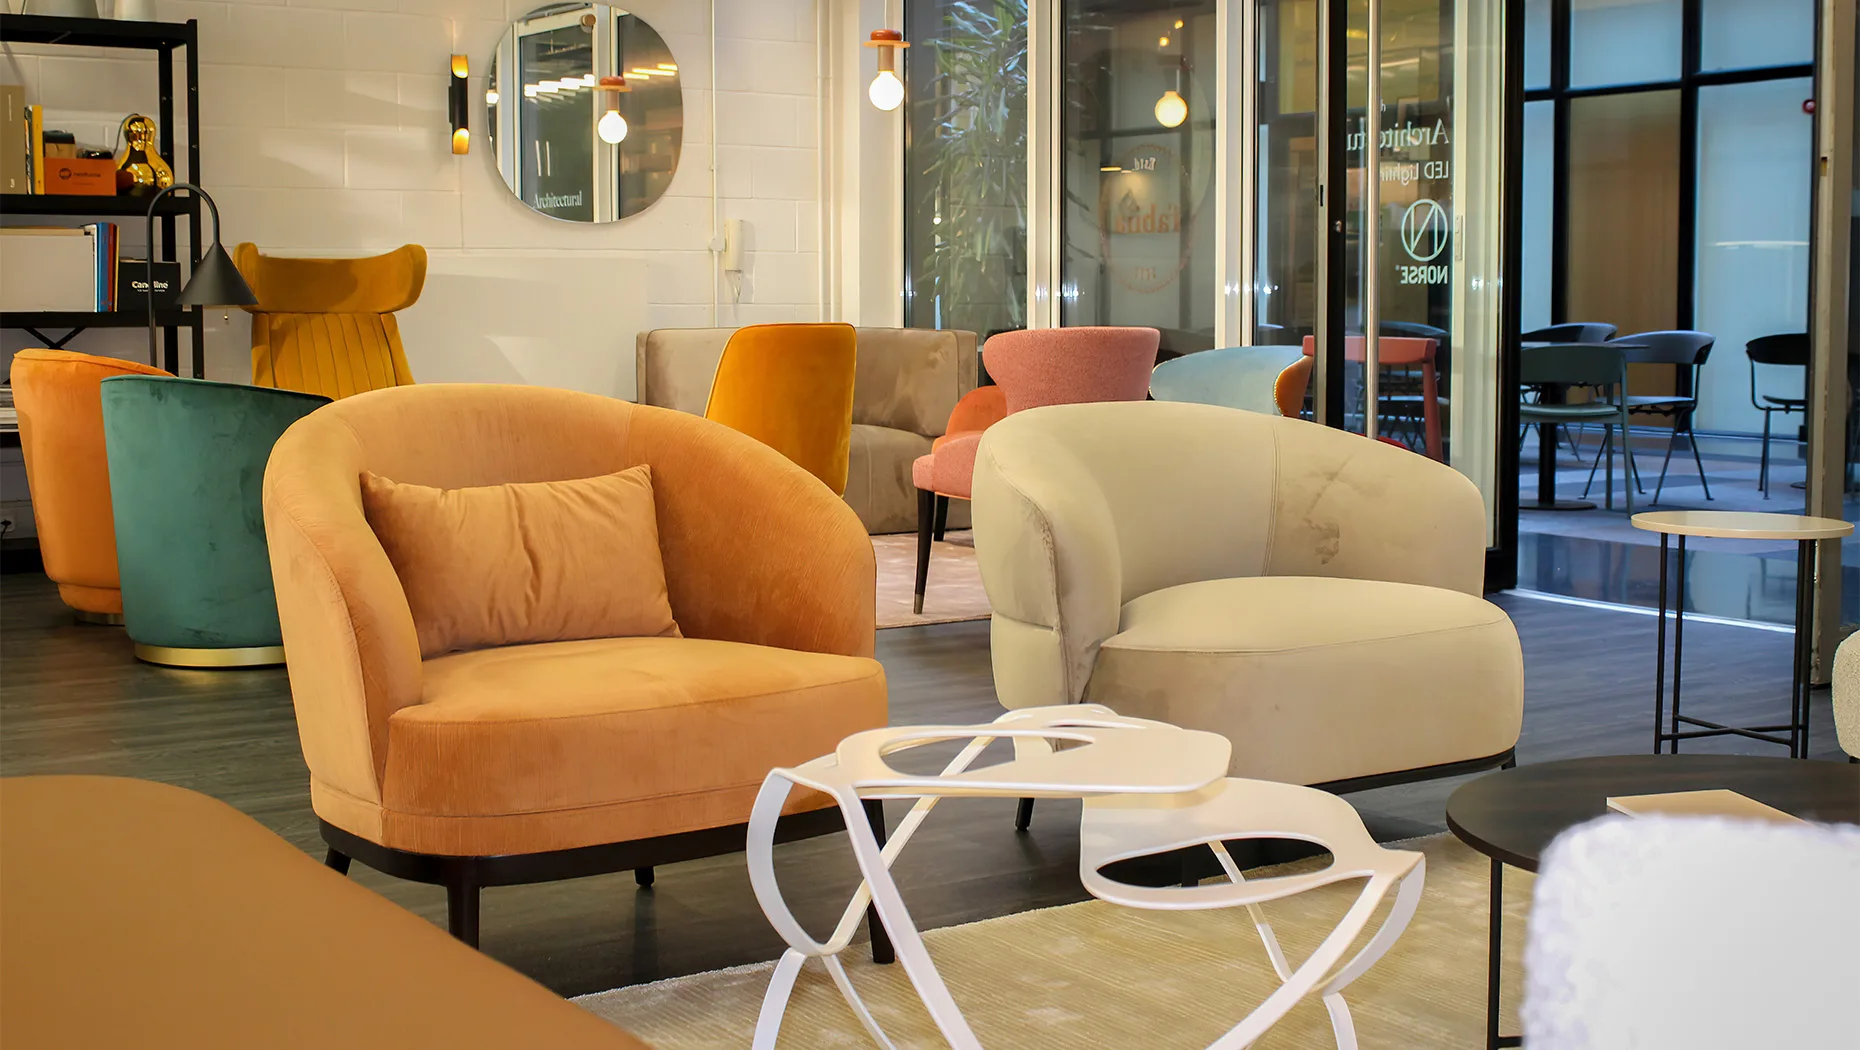 a display of cozy lounge armchairs with plush upholstery and a back cushion, as well as a round coffee table in the front